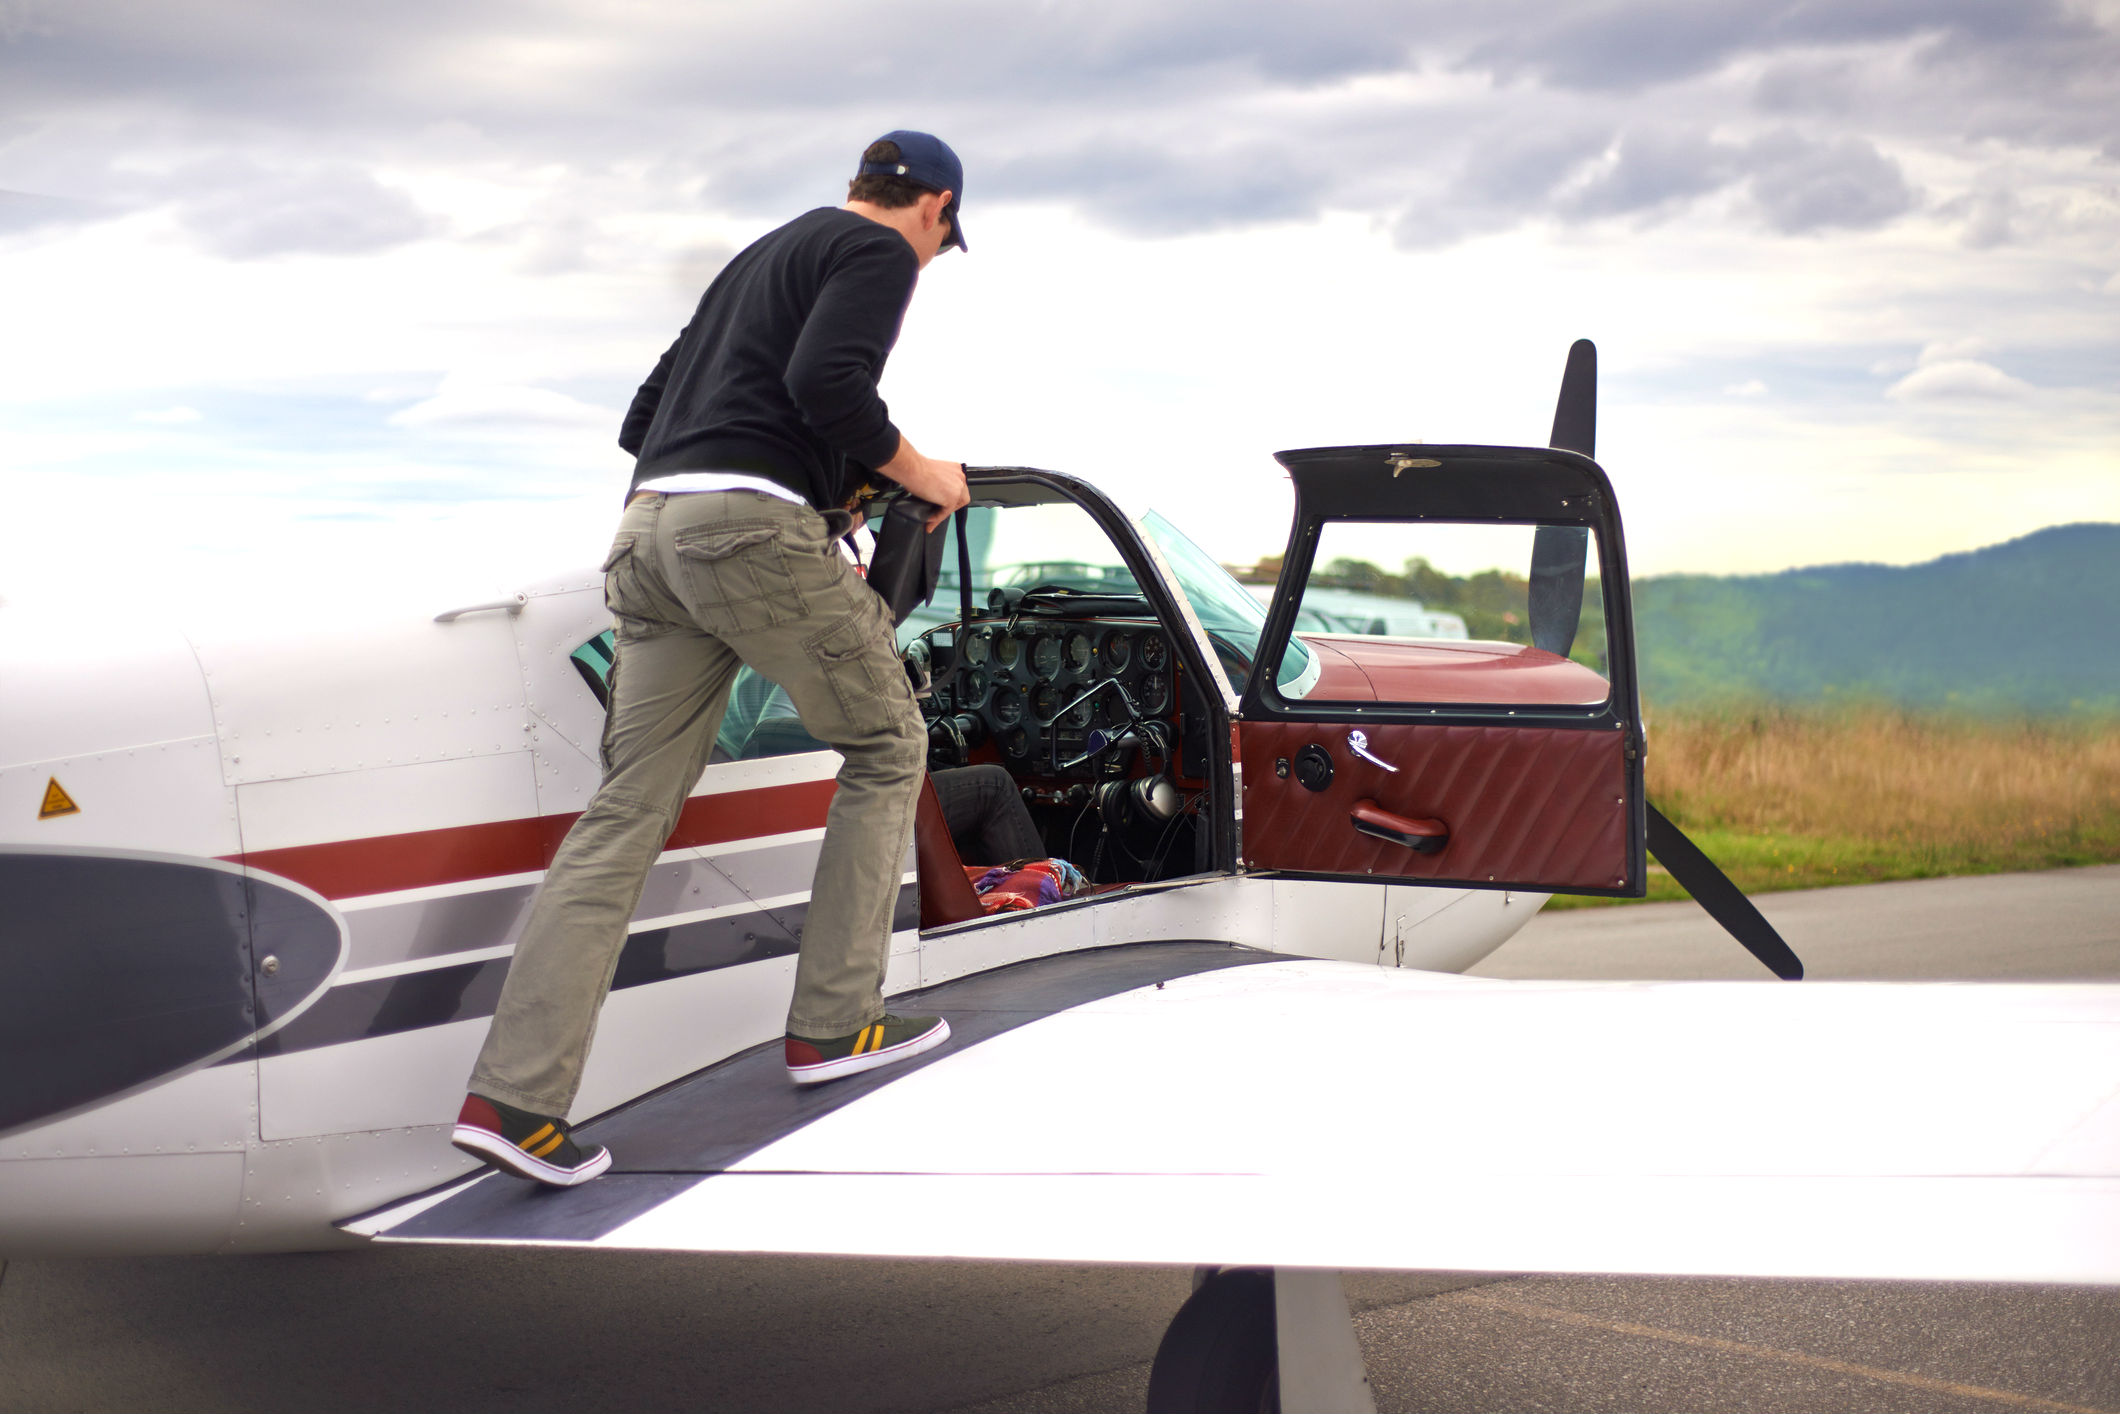 A pilot stands on the wing of his private aircraft